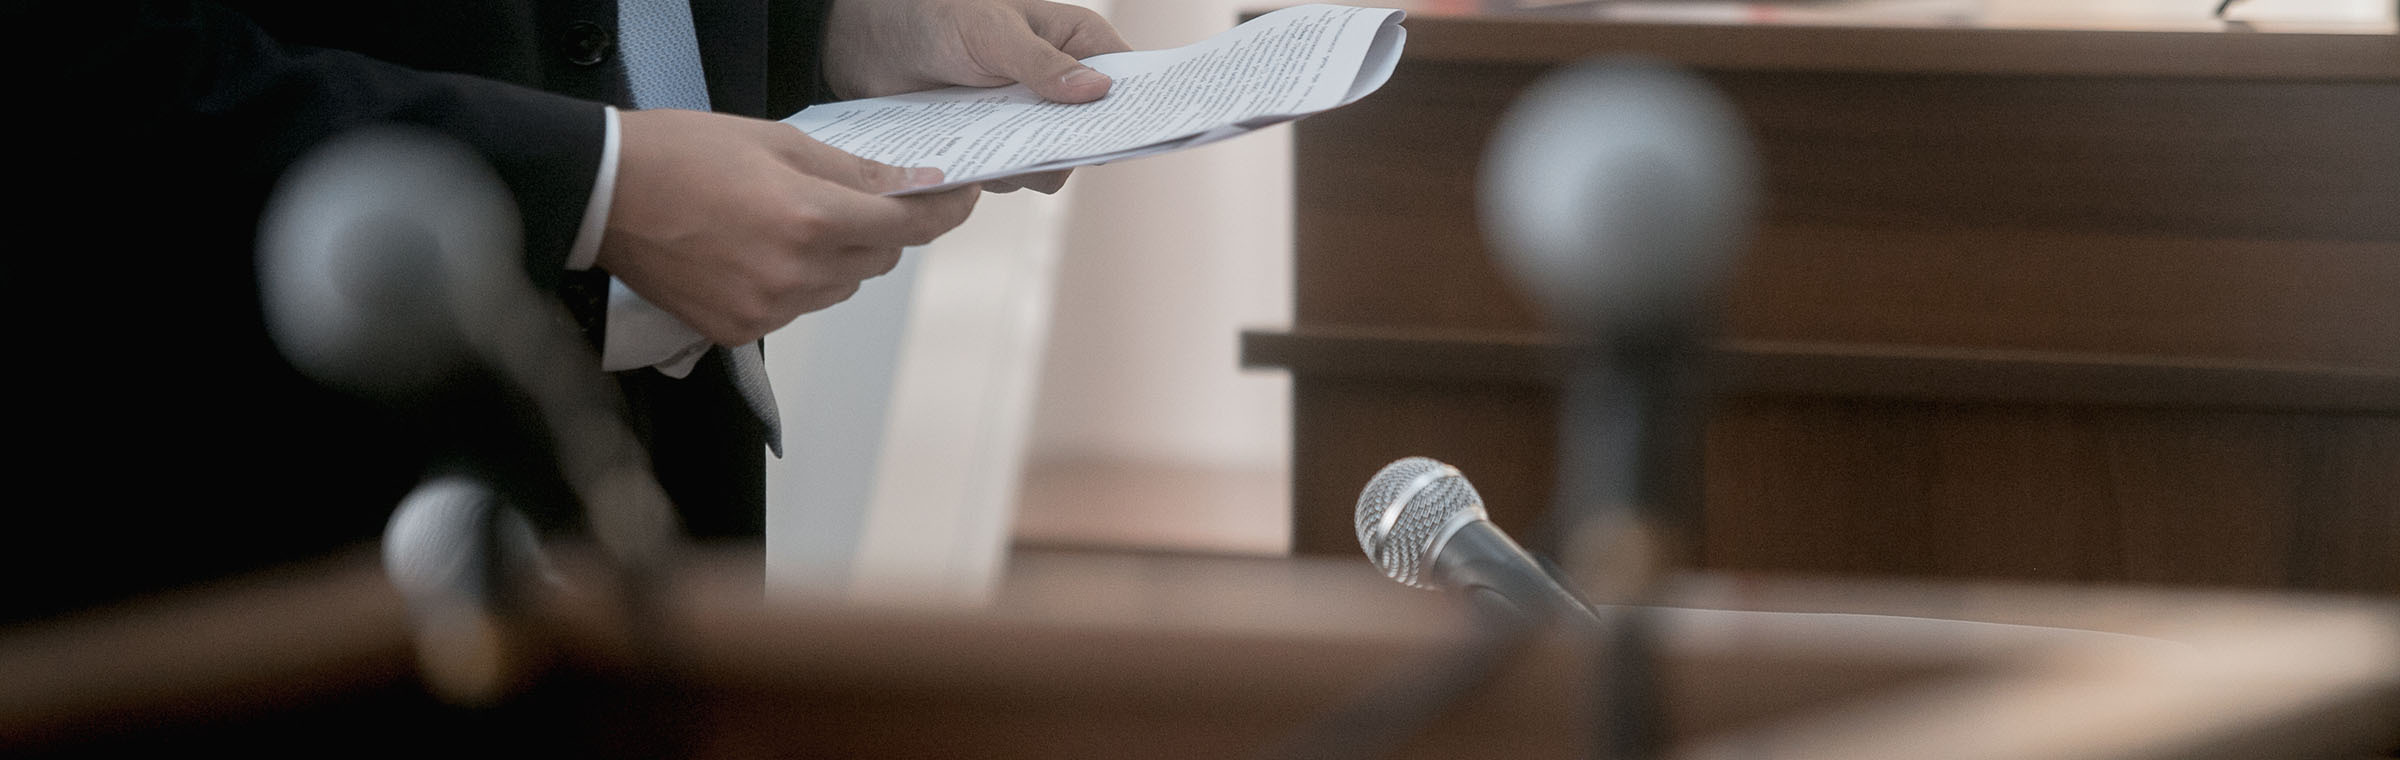 close up of microphones in a court room with a man holding papers in the background